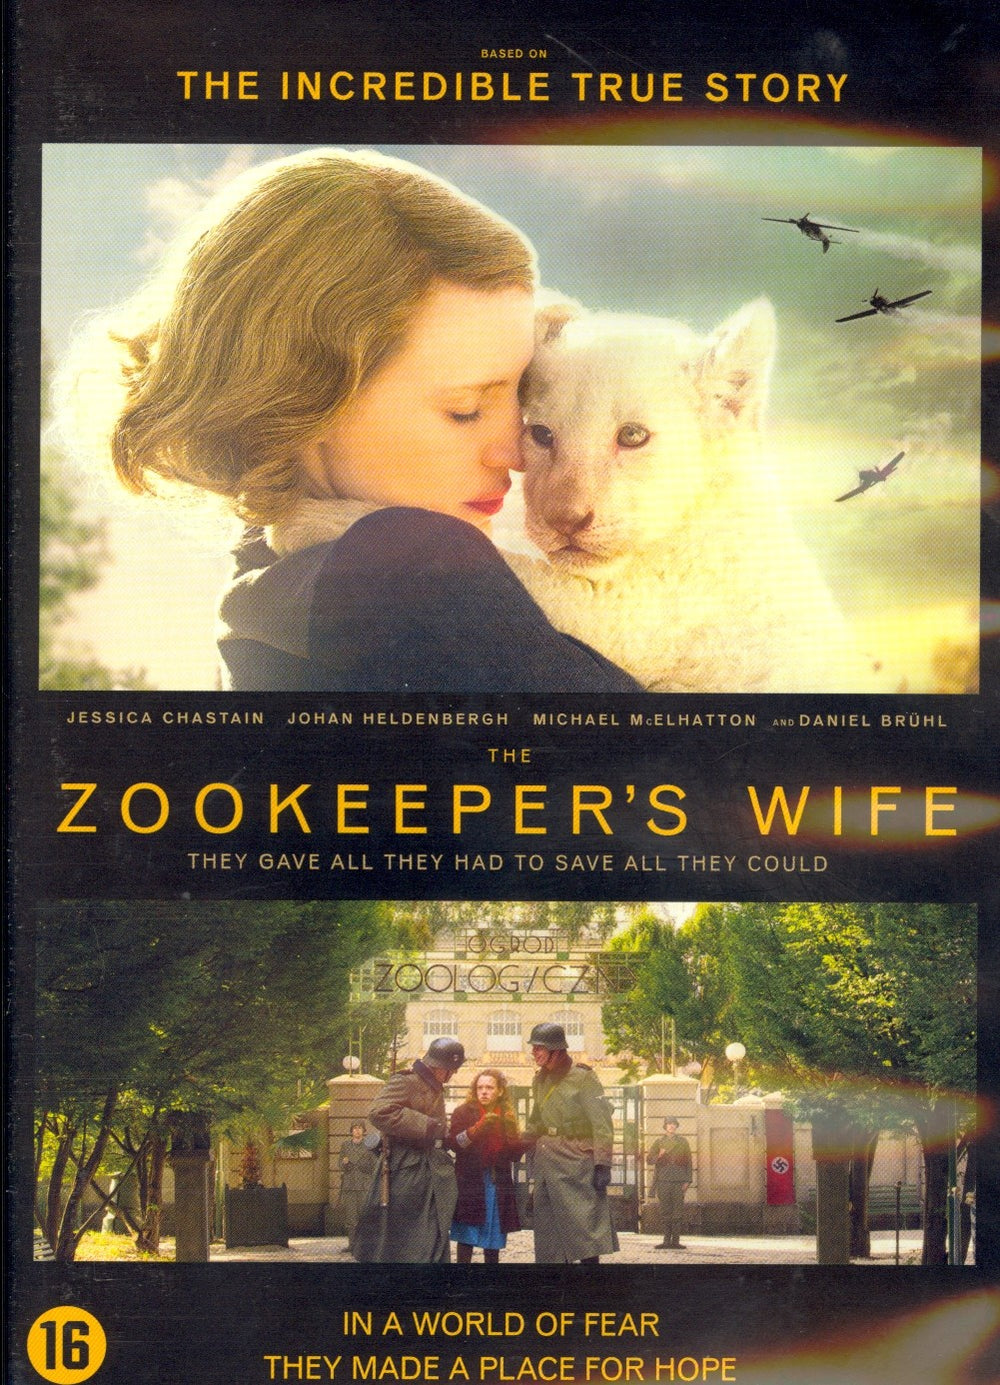 The Zookeepers wife (DVD)